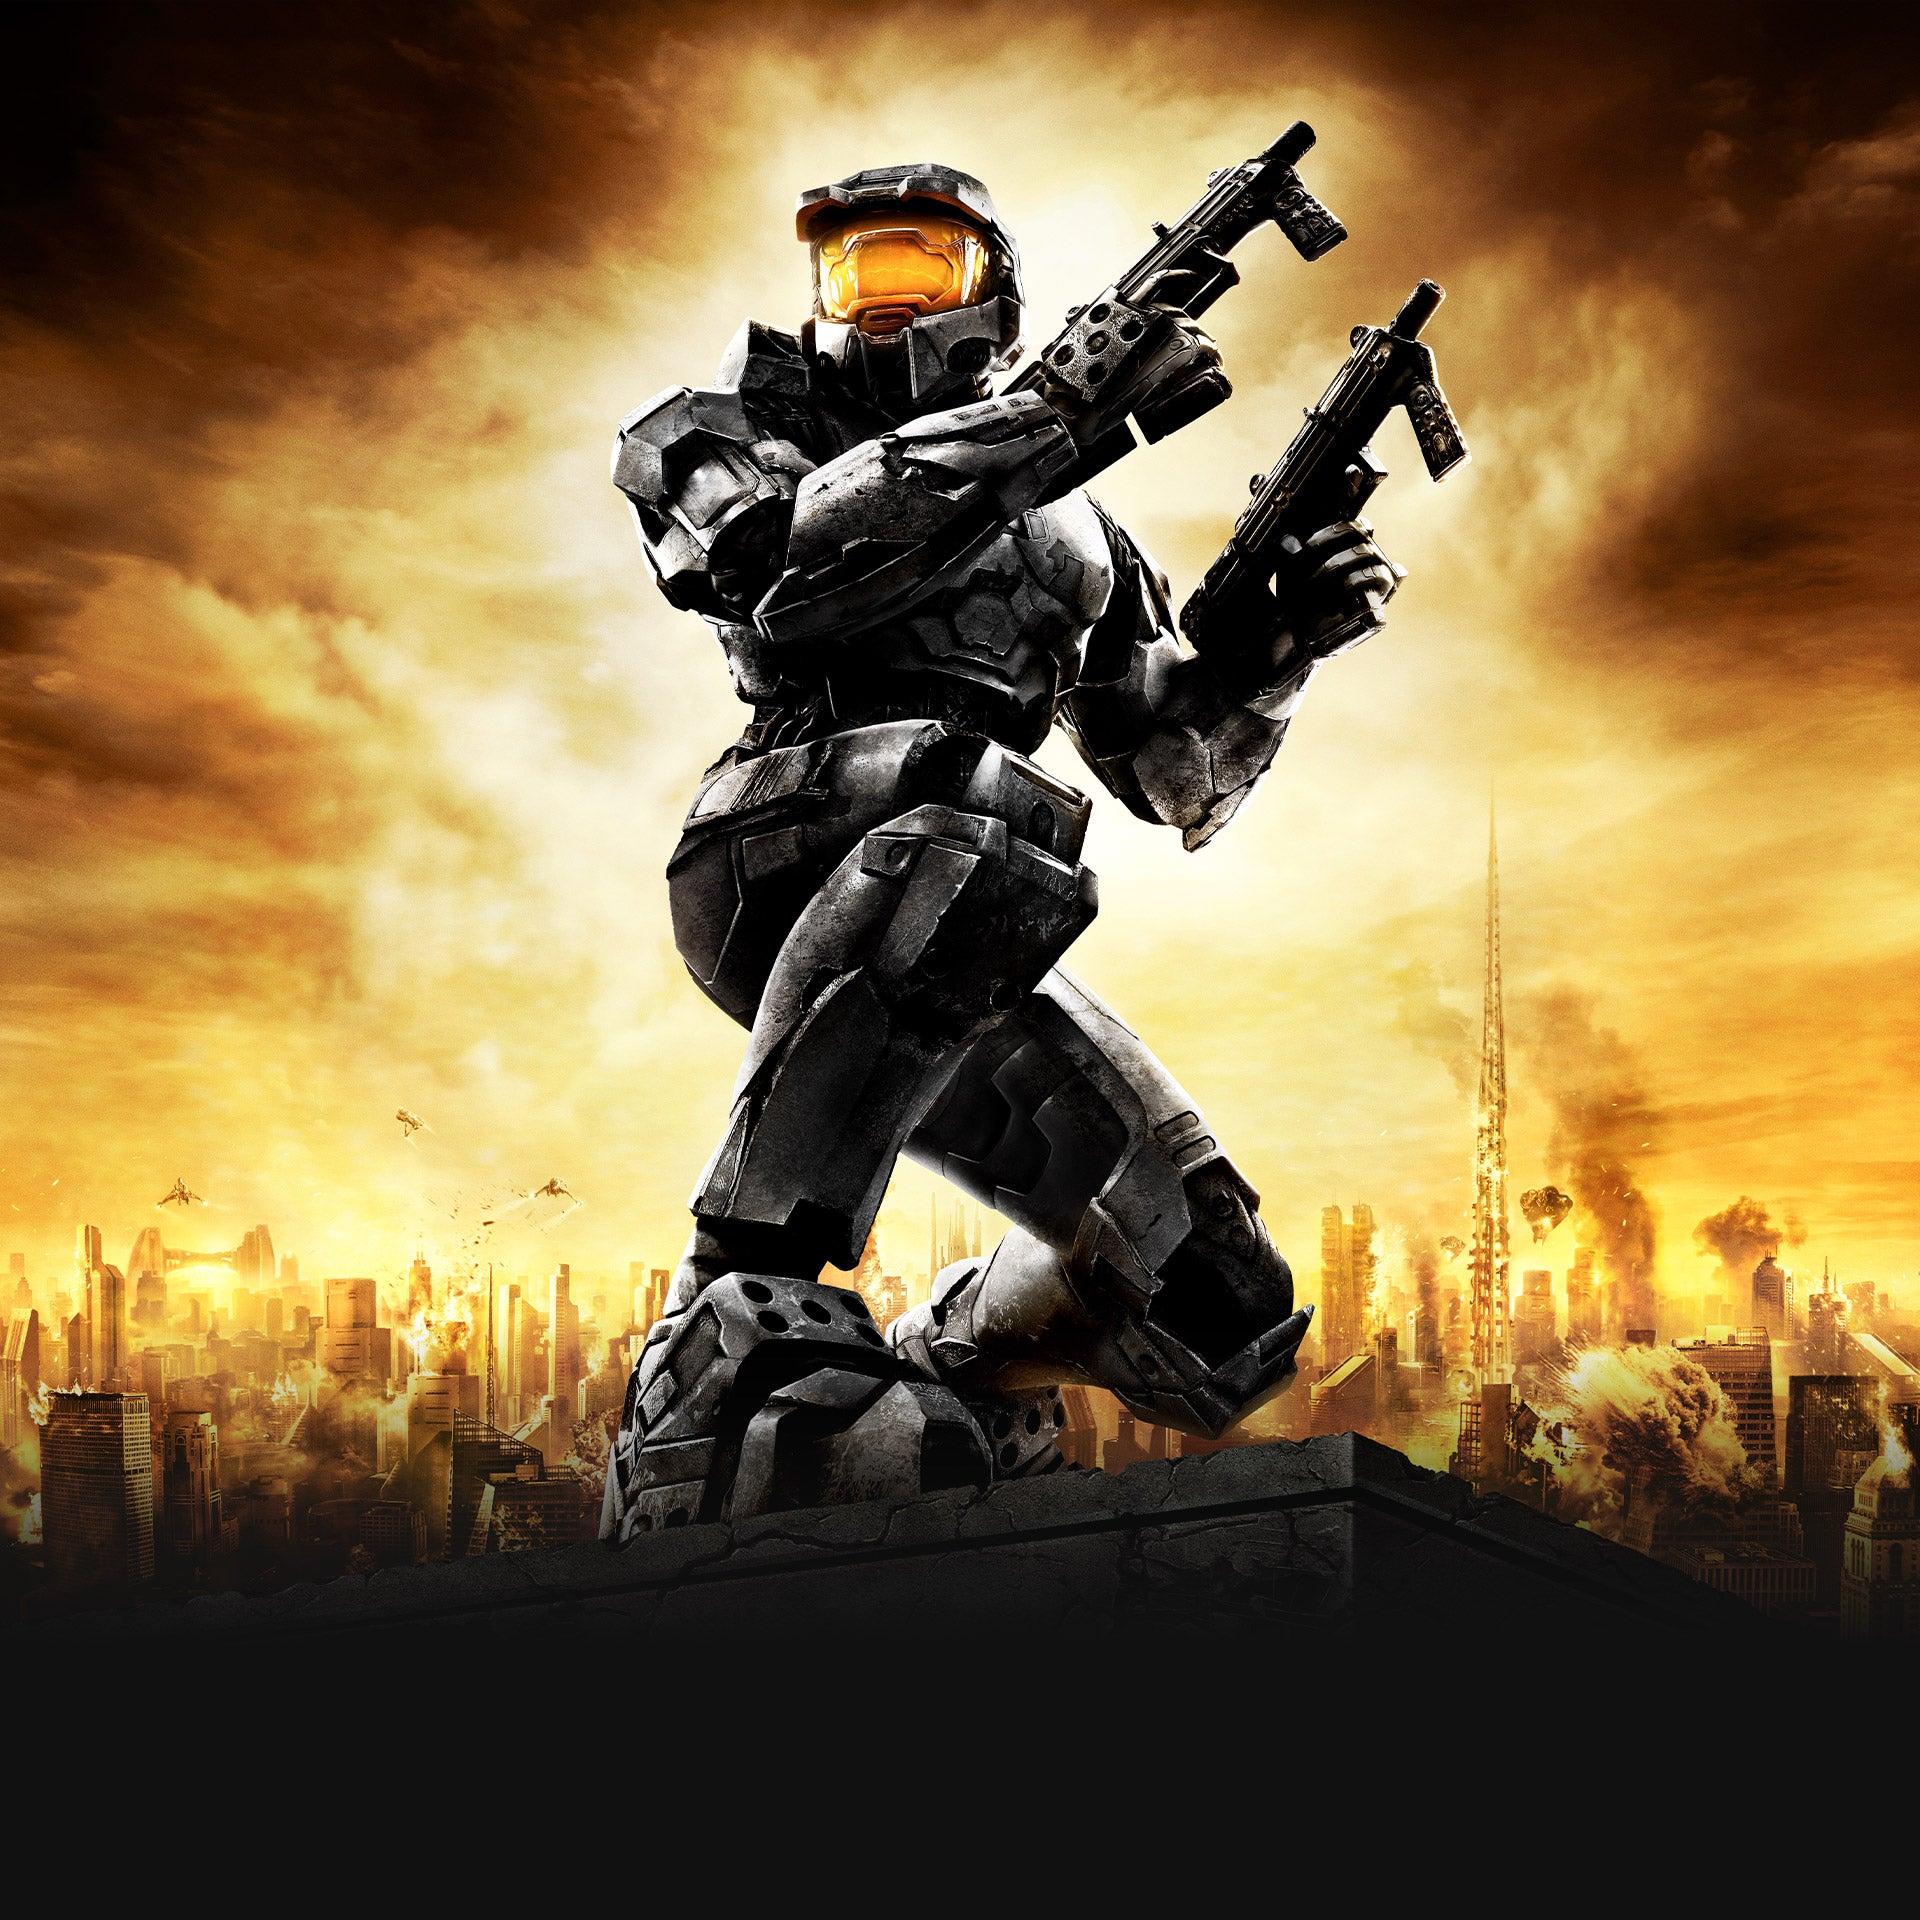 Image for Halo 2: Anniversary is coming to PC next week